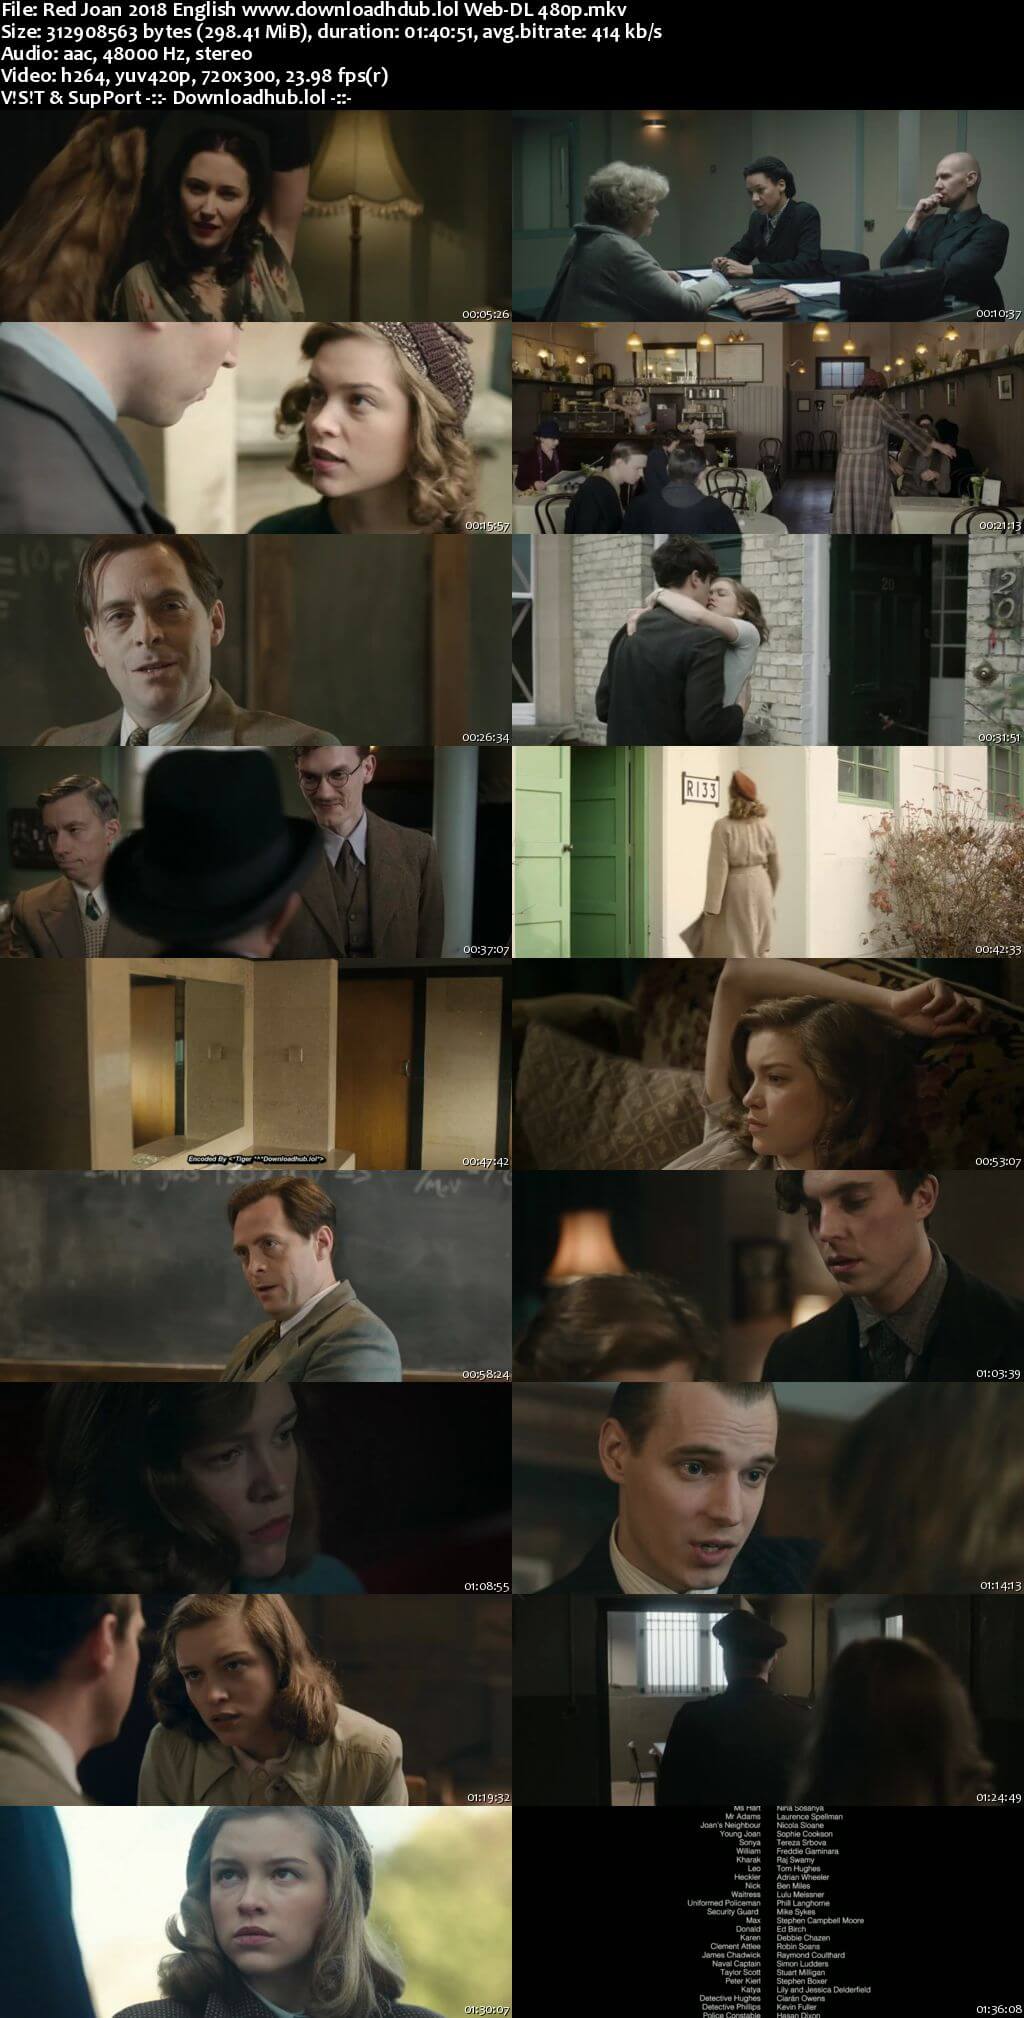 Red Joan 2018 English 300MB Web-DL 480p